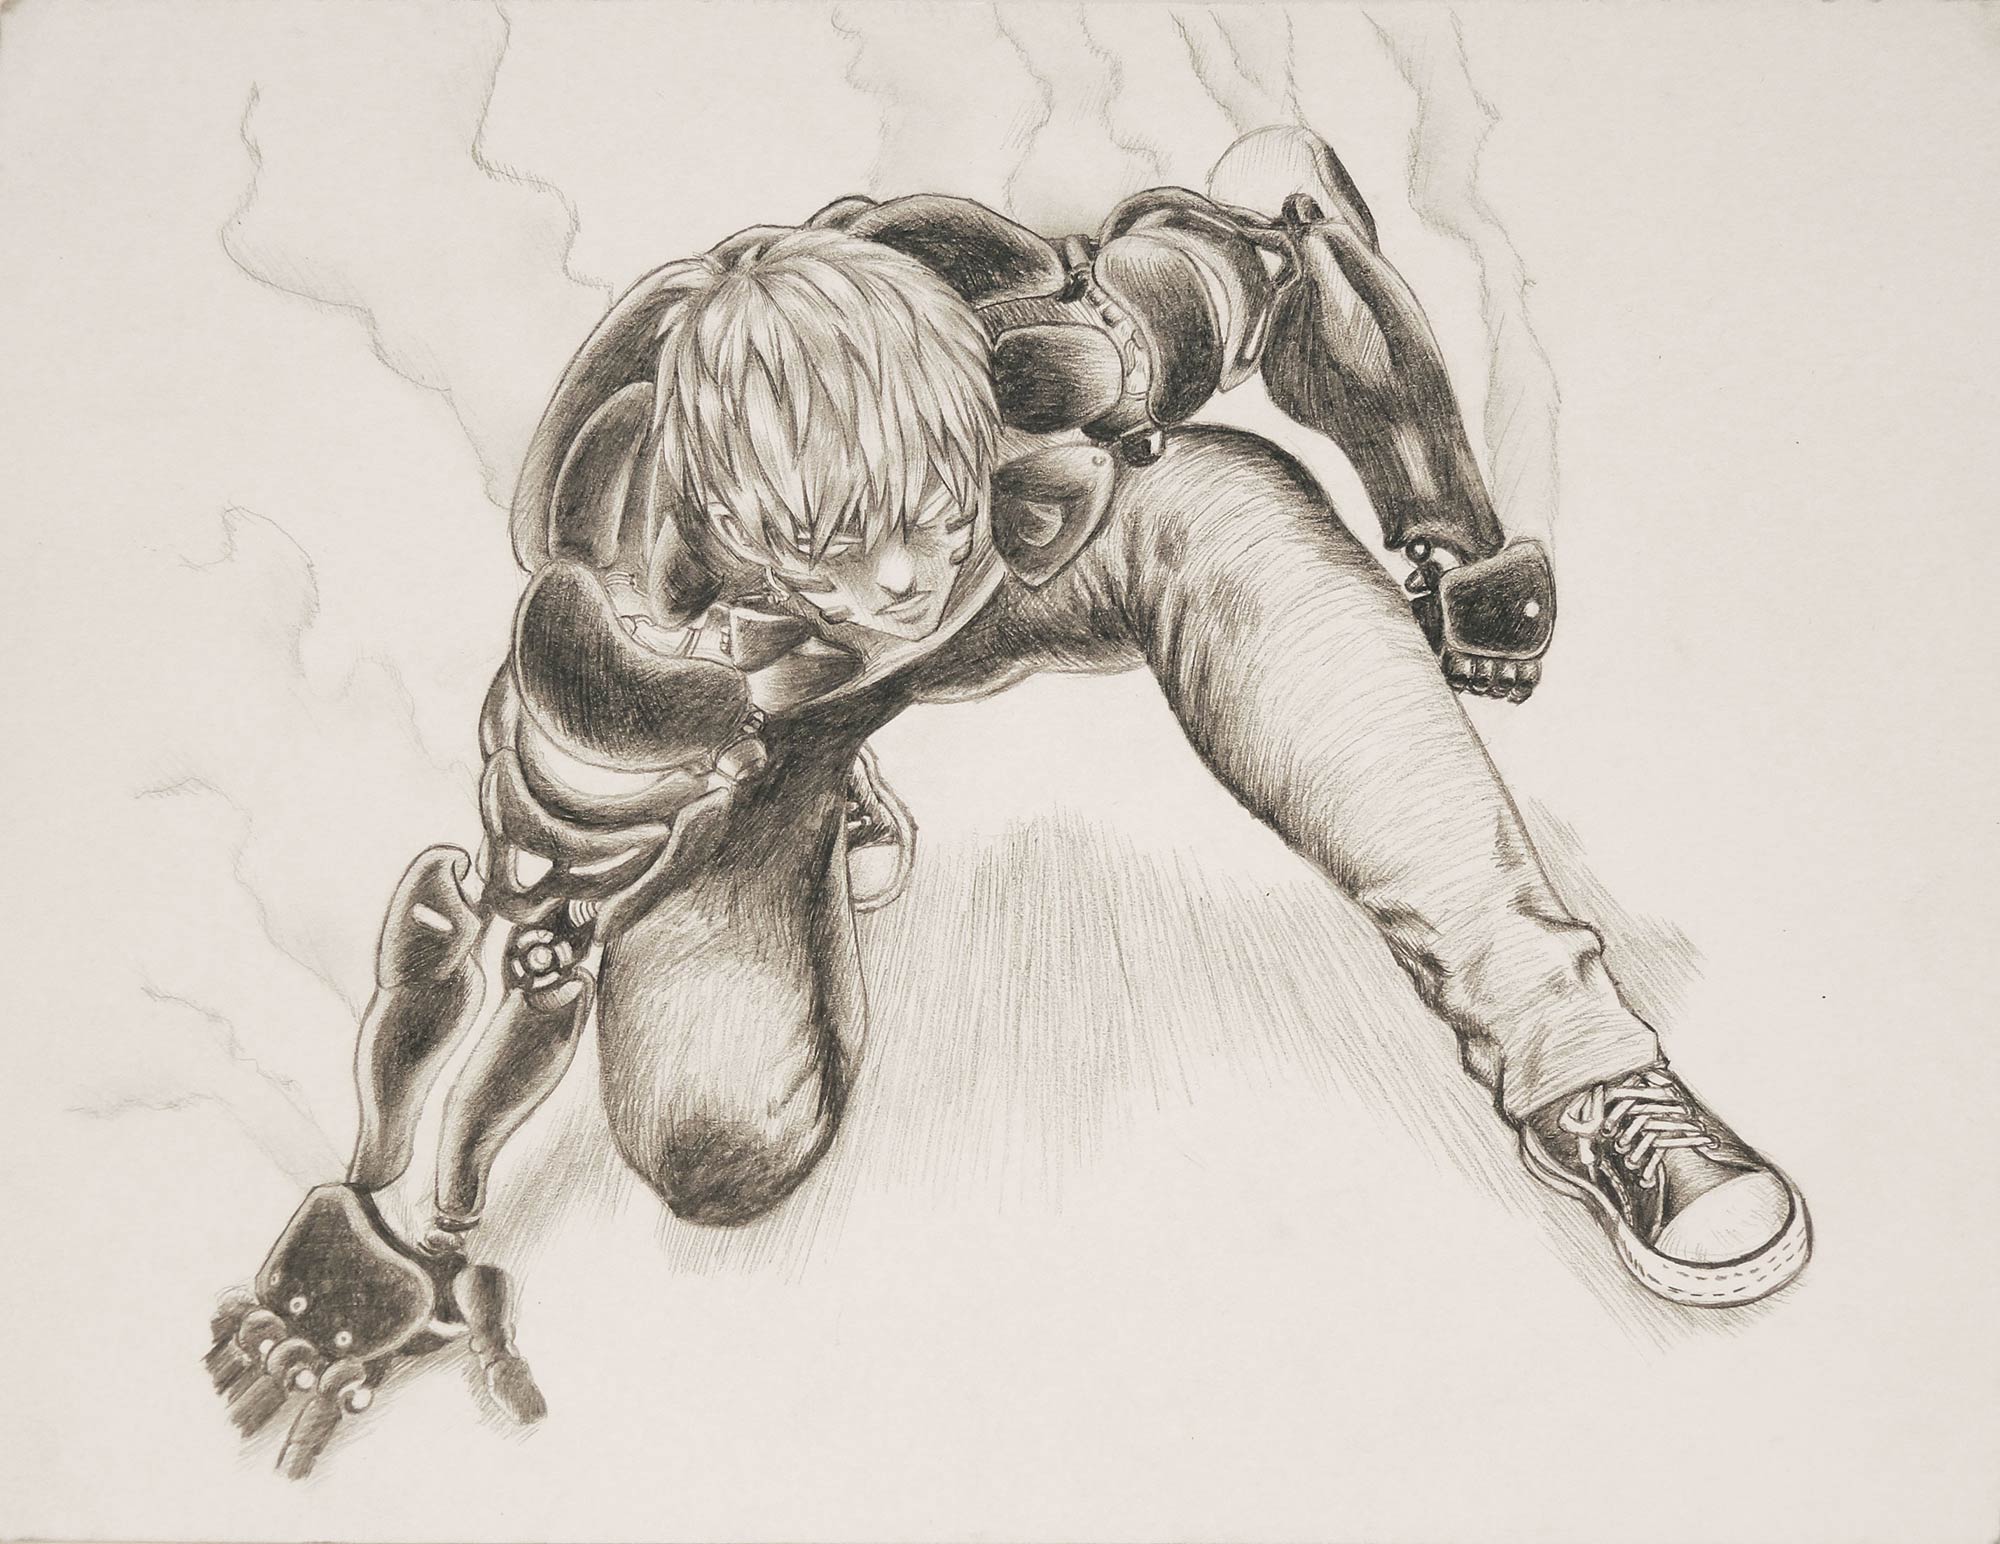 A drawing by Perdong Lin of a super hero in an action stance